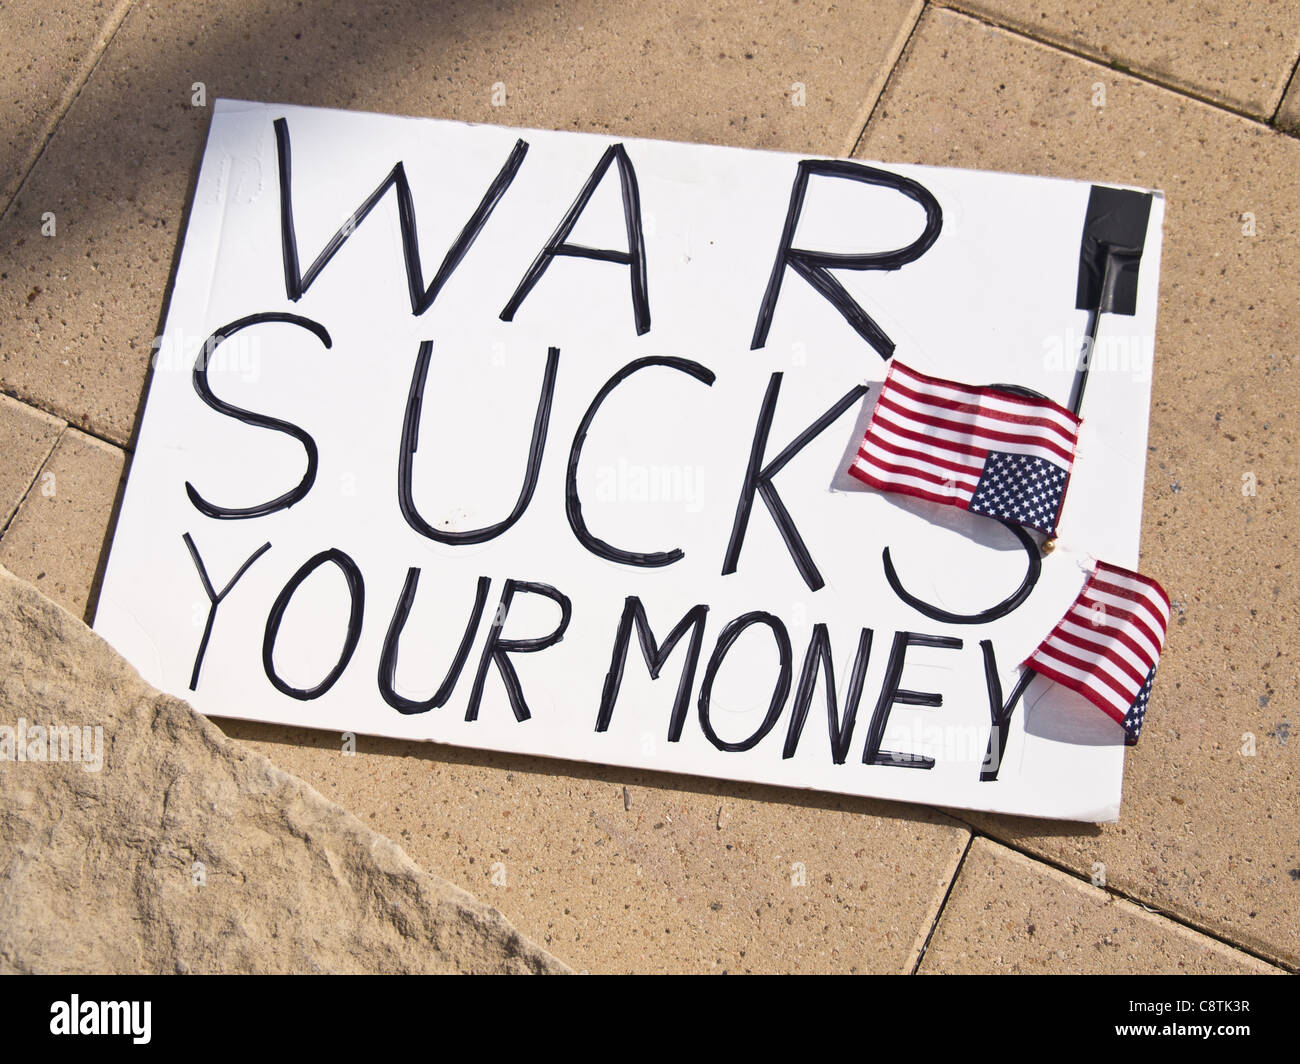 War Sucks Your Money - A protest sign at Occupy Austin, an offshoot of the Occupy Wall Street movement Stock Photo